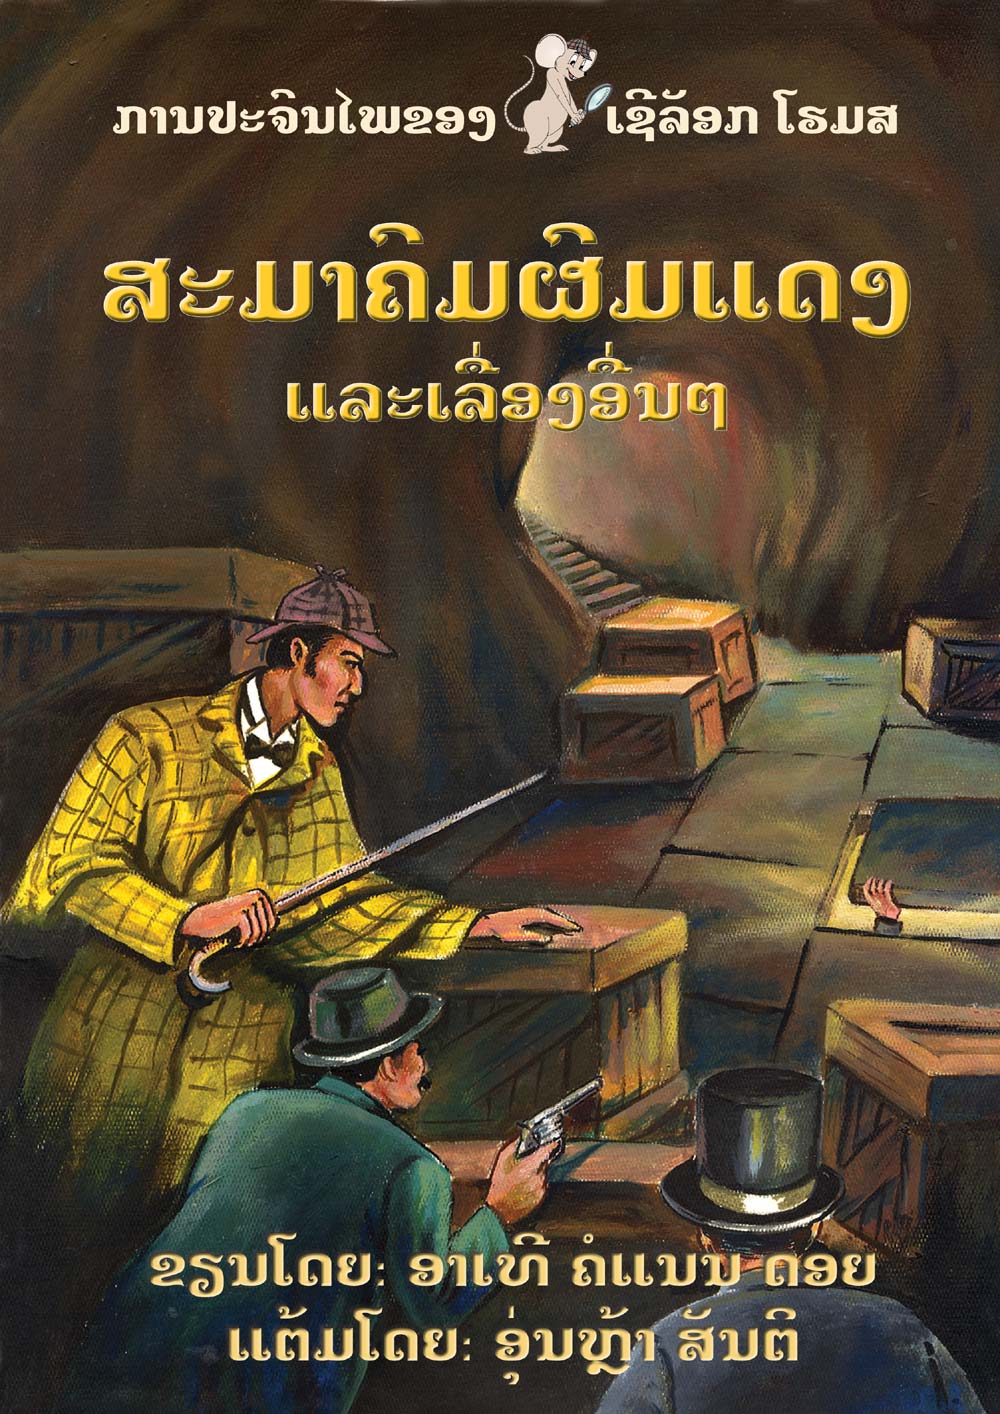 The Red-Headed Club, and other stories large book cover, published in Lao language